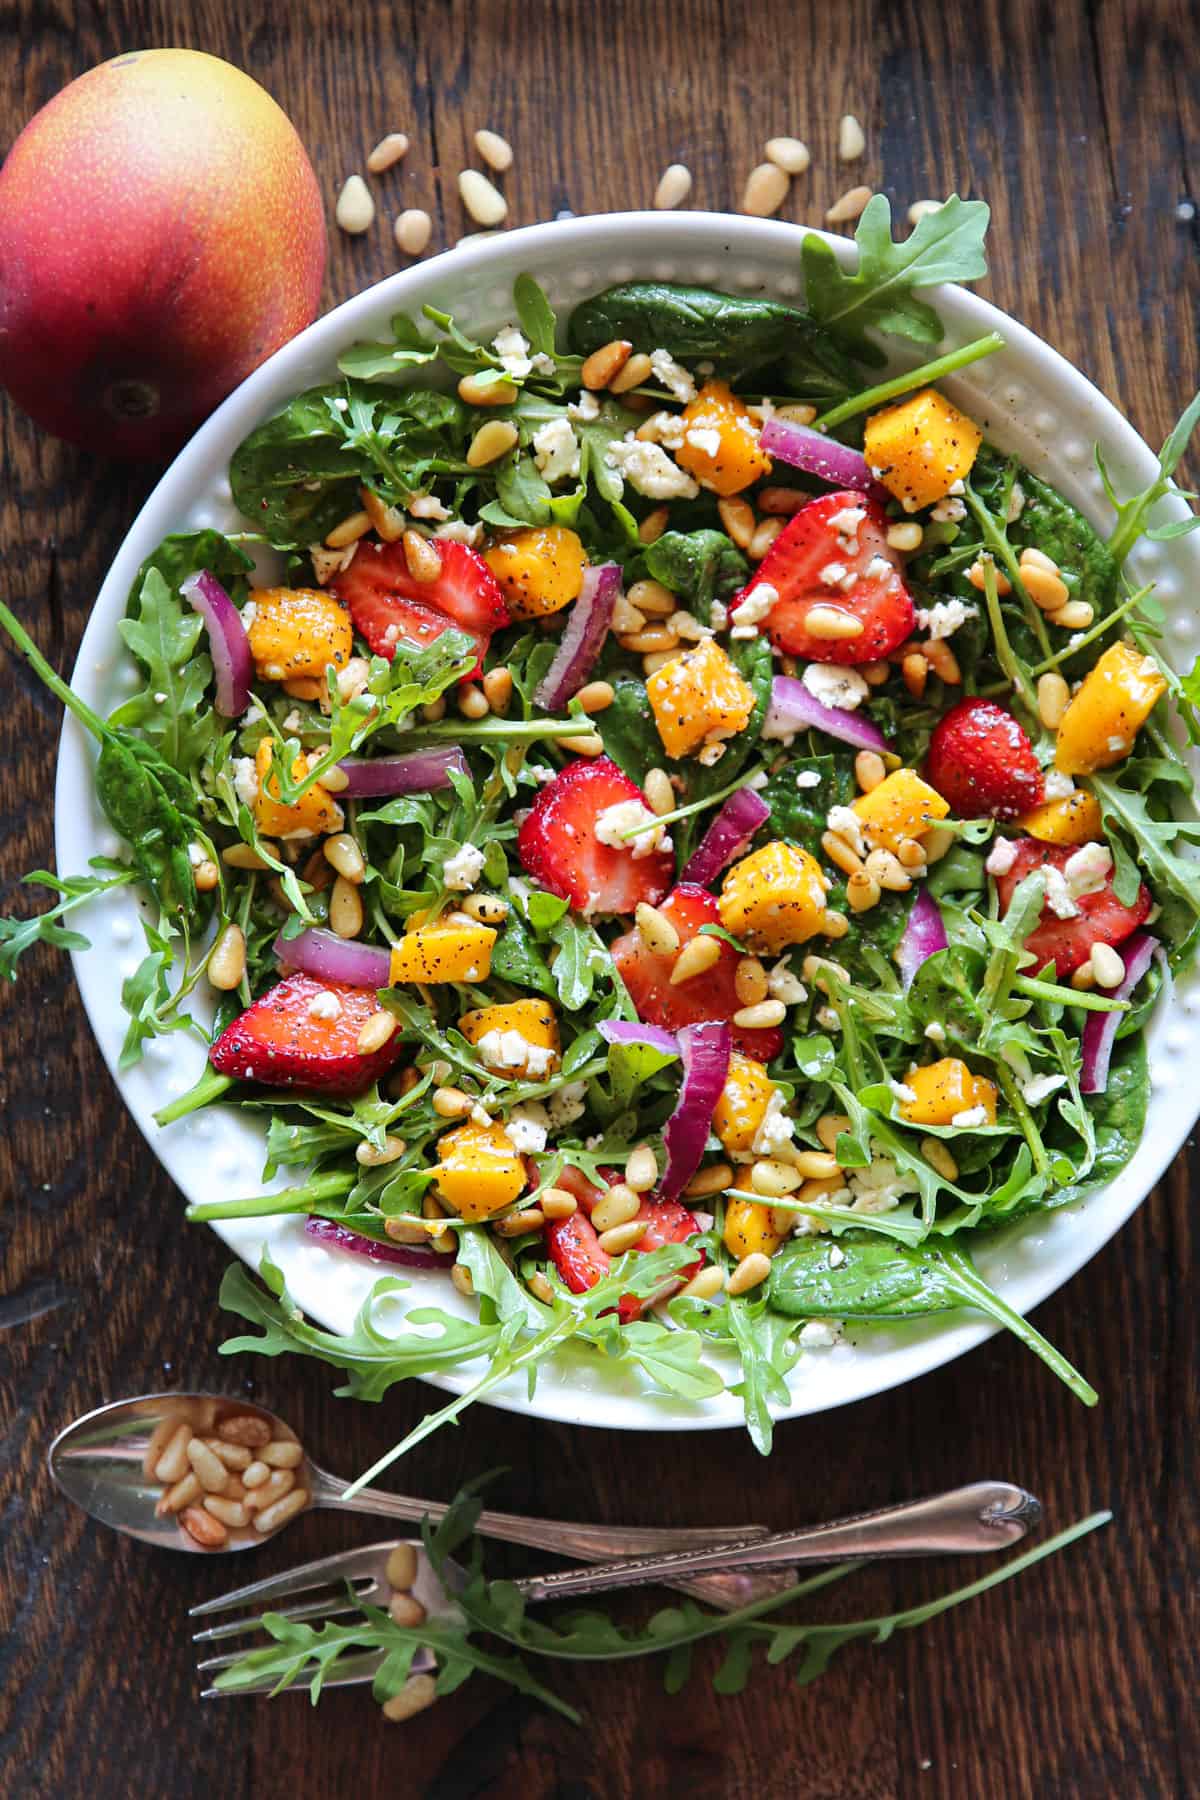 Strawberries and mango salad with fresh greens (arugula and spinach), sliced red onion, feta cheese, and pine nuts in a lemon honey mustard dressing - in a white bowl.